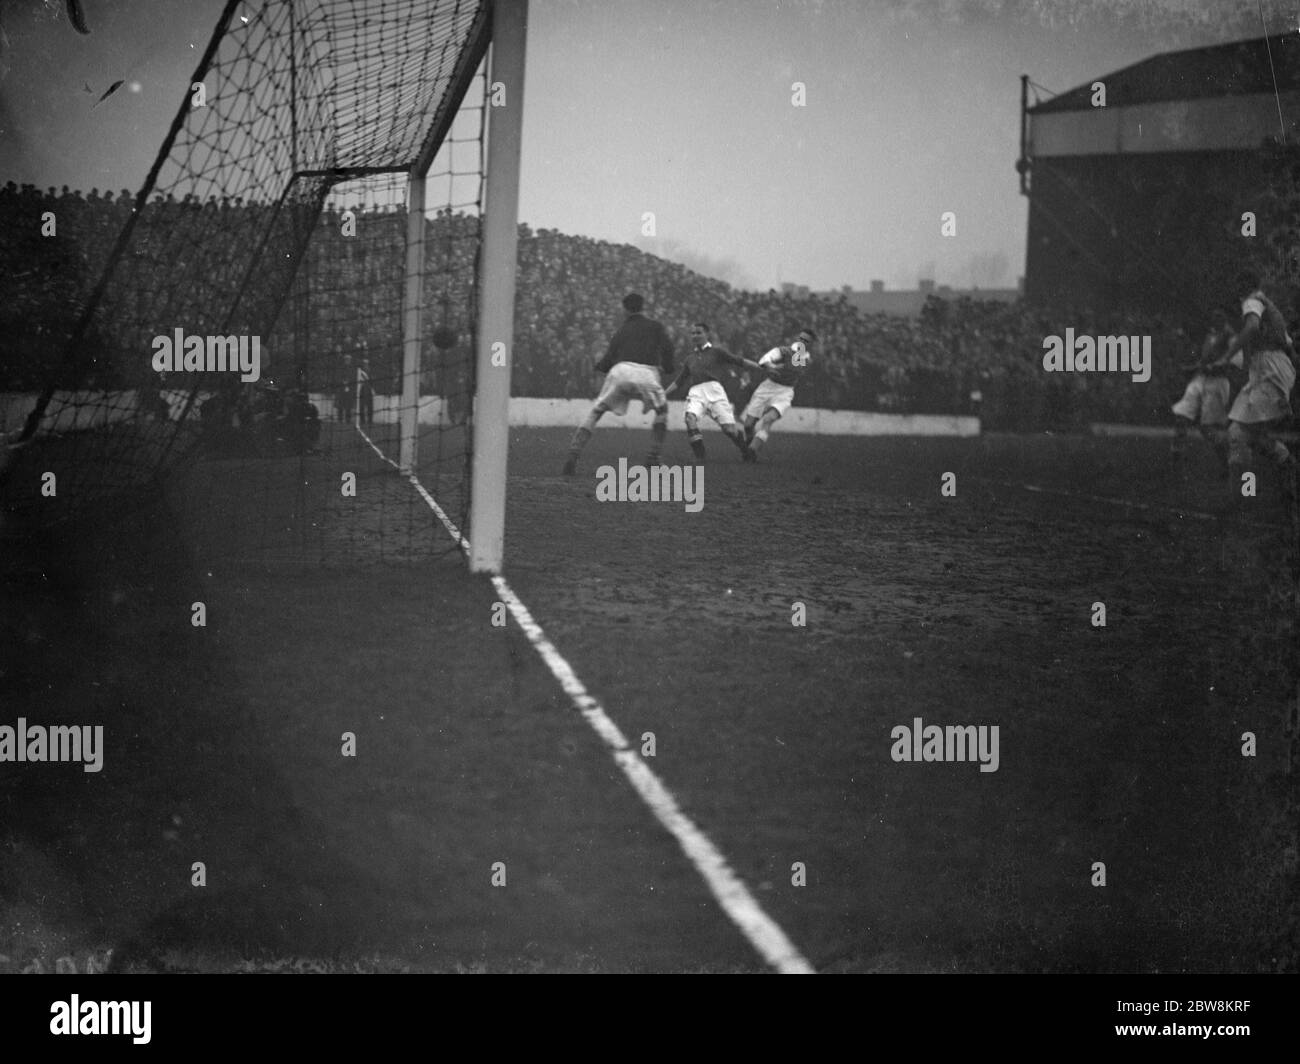 Charlton Athletic football club versus Cardiff City football club . The goalkeeper watches as an attacker shoots at goal . 1938 Stock Photo